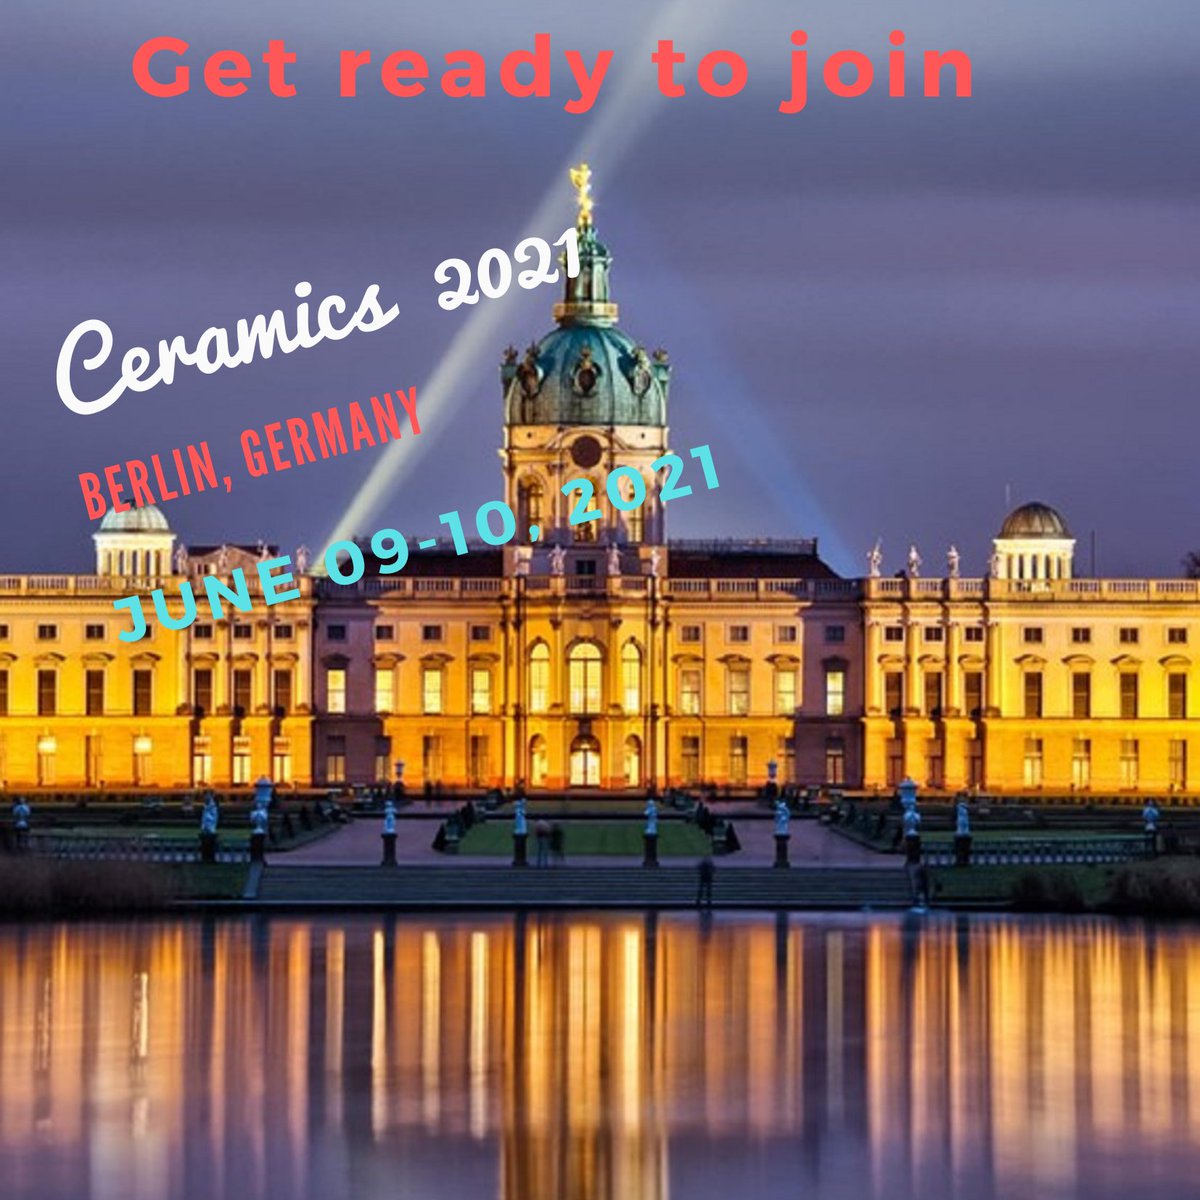 Hurry up!! Book your slot at : 
ceramics.insightconferences.com/registration.p…
Take a chance to show your research work at 
#ceramics2021 Berlin, Germany during June 09-10, 2021
#CeramicCoatings  #GlassCeramics #PorousCeramics
#nuclearceramics
@SainsburyCentre @HighTechNDT
@futureNetZero